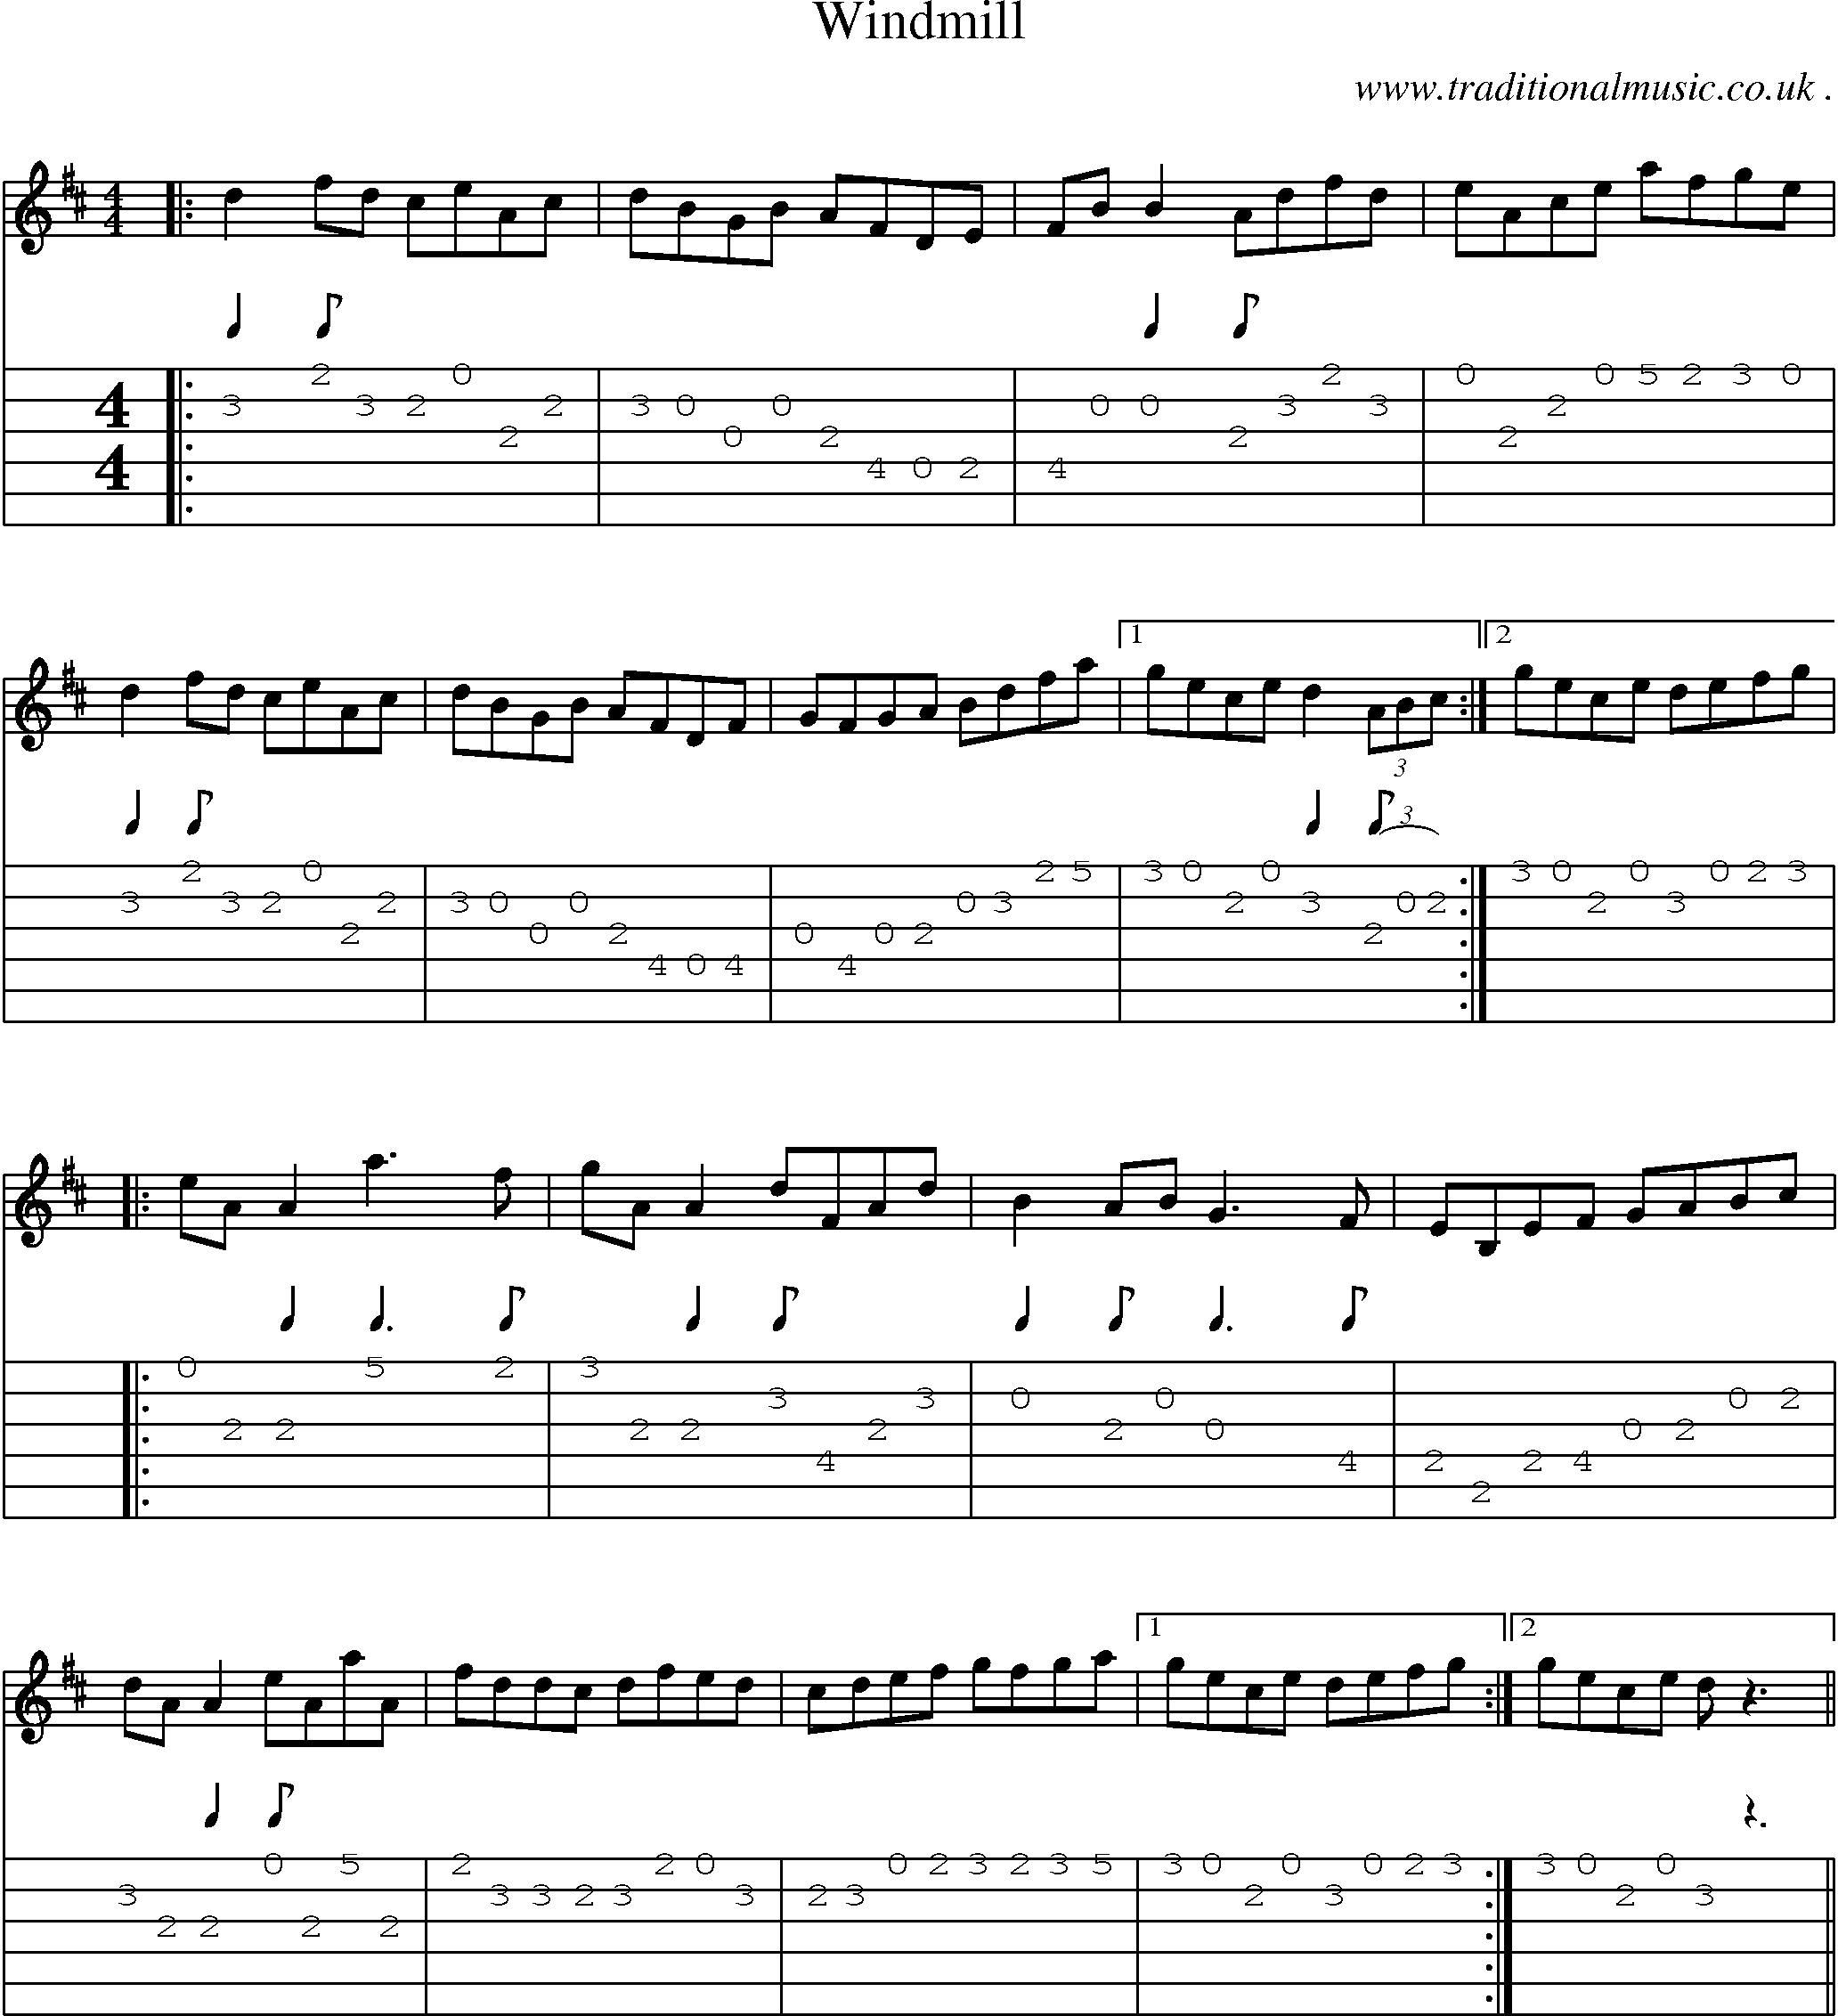 Sheet-Music and Guitar Tabs for Windmill